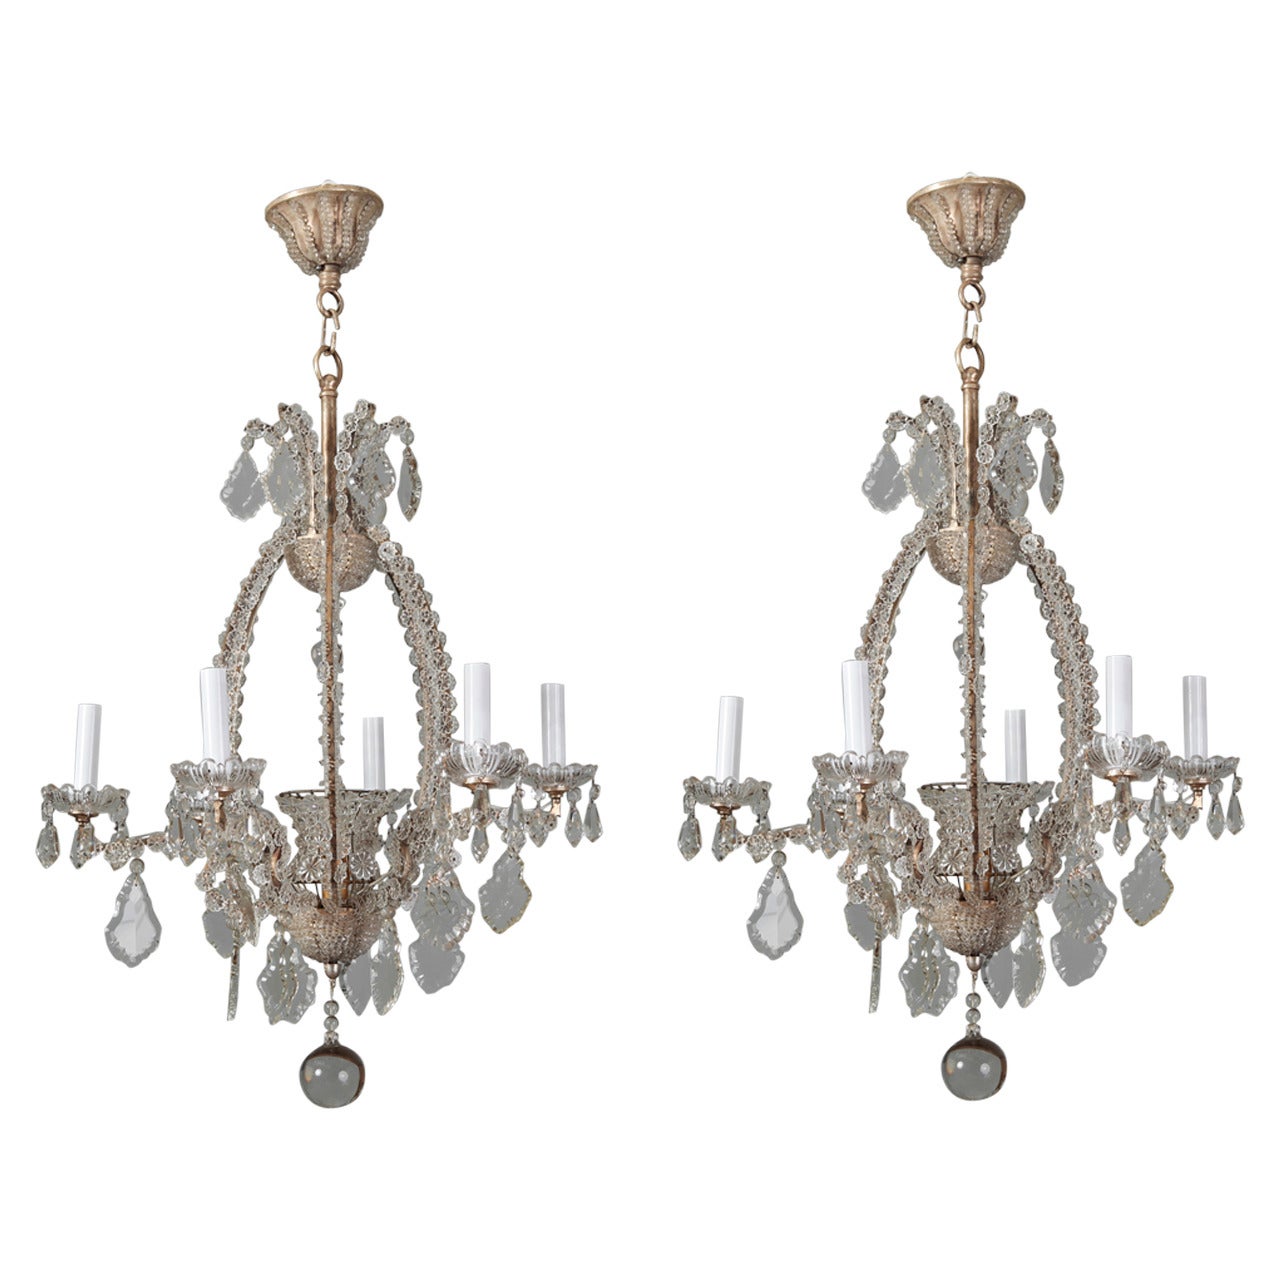 Pair of Italian Chandeliers with Round Beads and Original Beaded Canopies